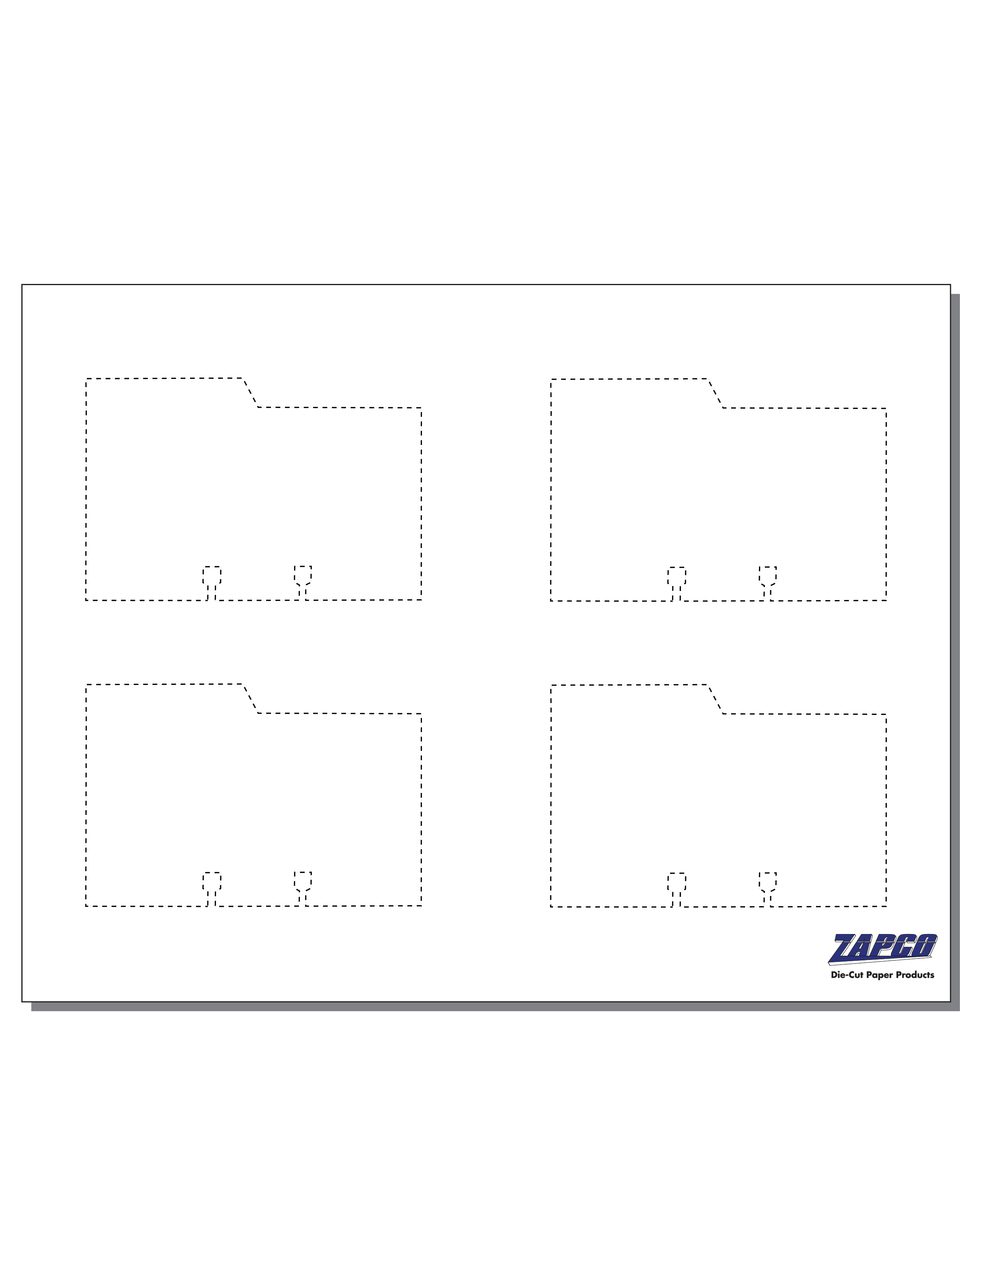 Item 122: 4-Up 2 5/8" x 4" Rotary File Card Left Tab 8 1/2" x 11" Sheet(250 Sheets)